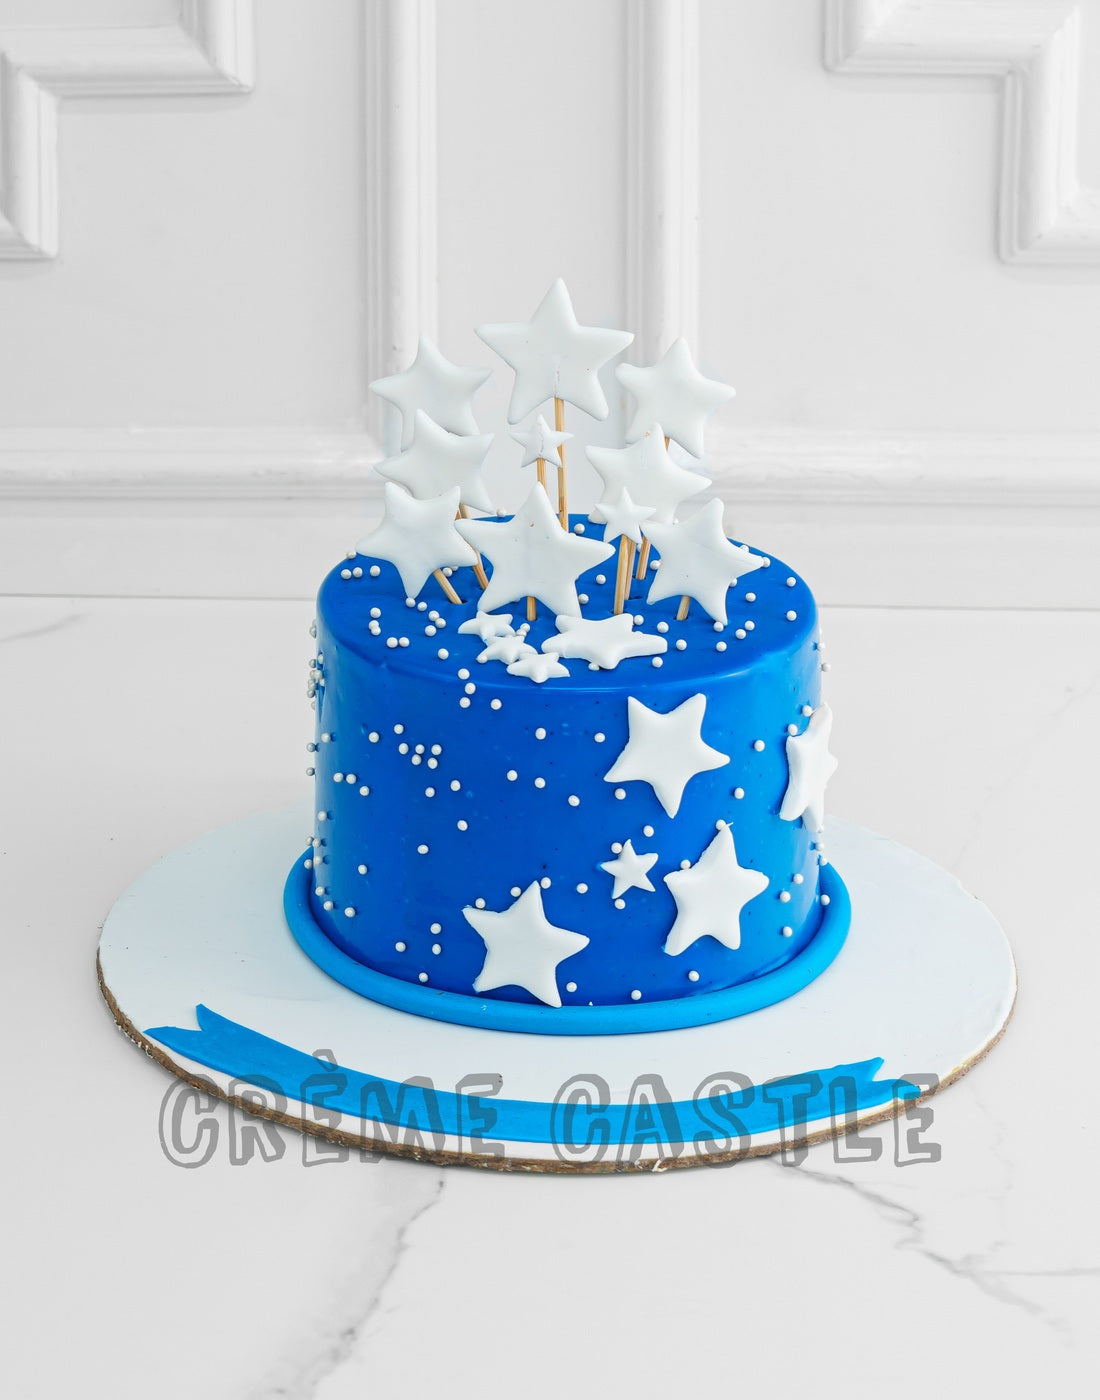 Kids Birthday Cakes — Blue Lace Cakes